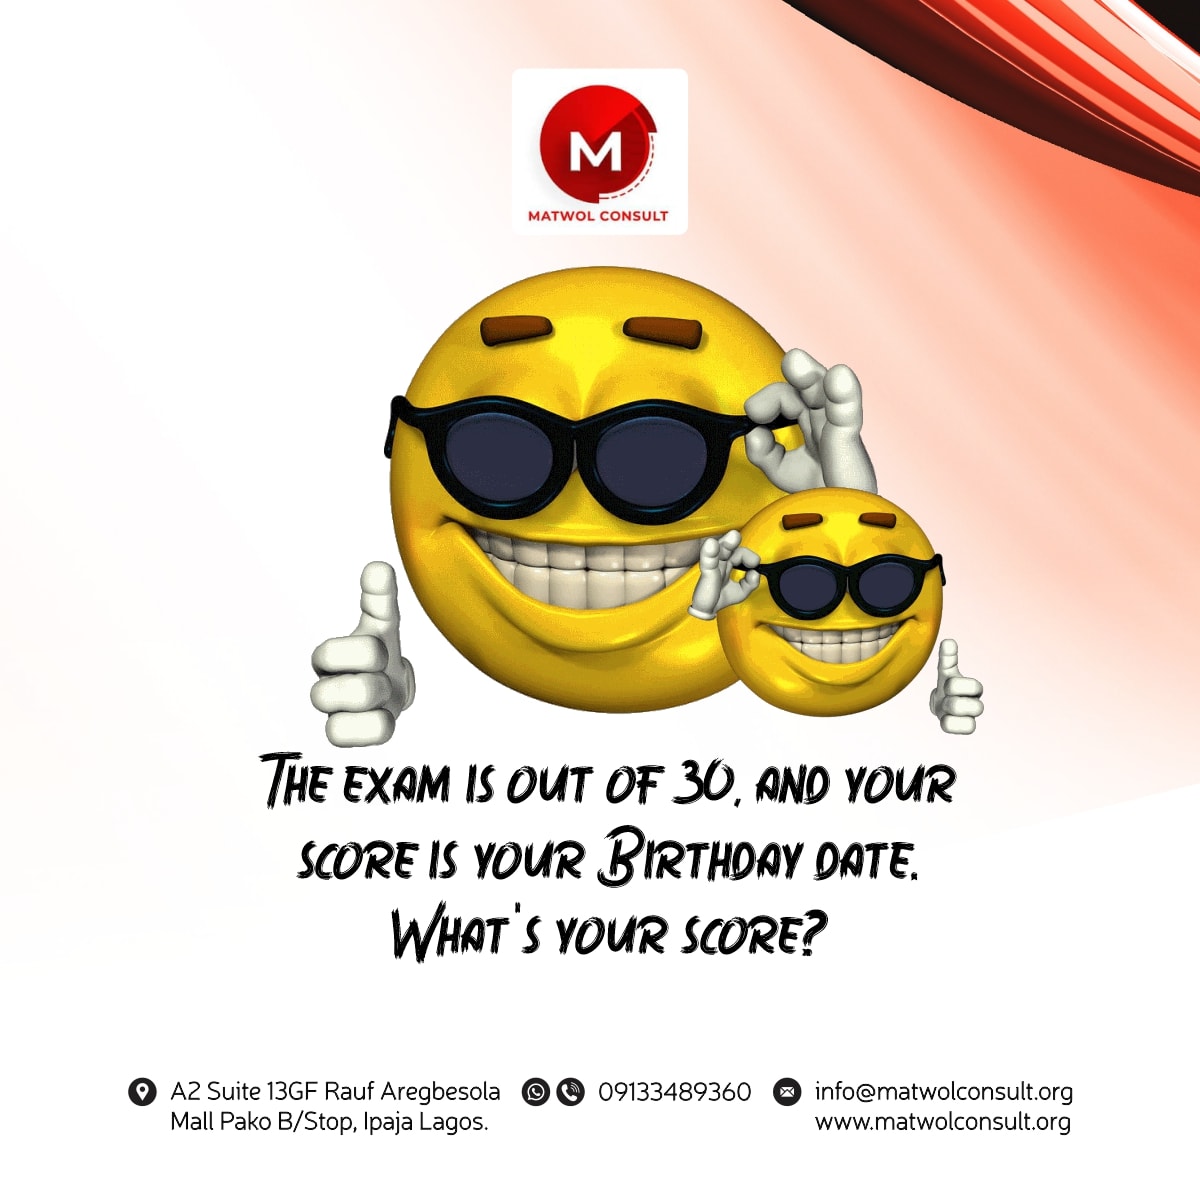 This should be fun 😄!! Exam over 30, your birthday date is your score

Let's see what you have !!!

#ThursdayTrivia #birthday #question #Matwolconsult #comment4comment #likesforlike #travelconsultant